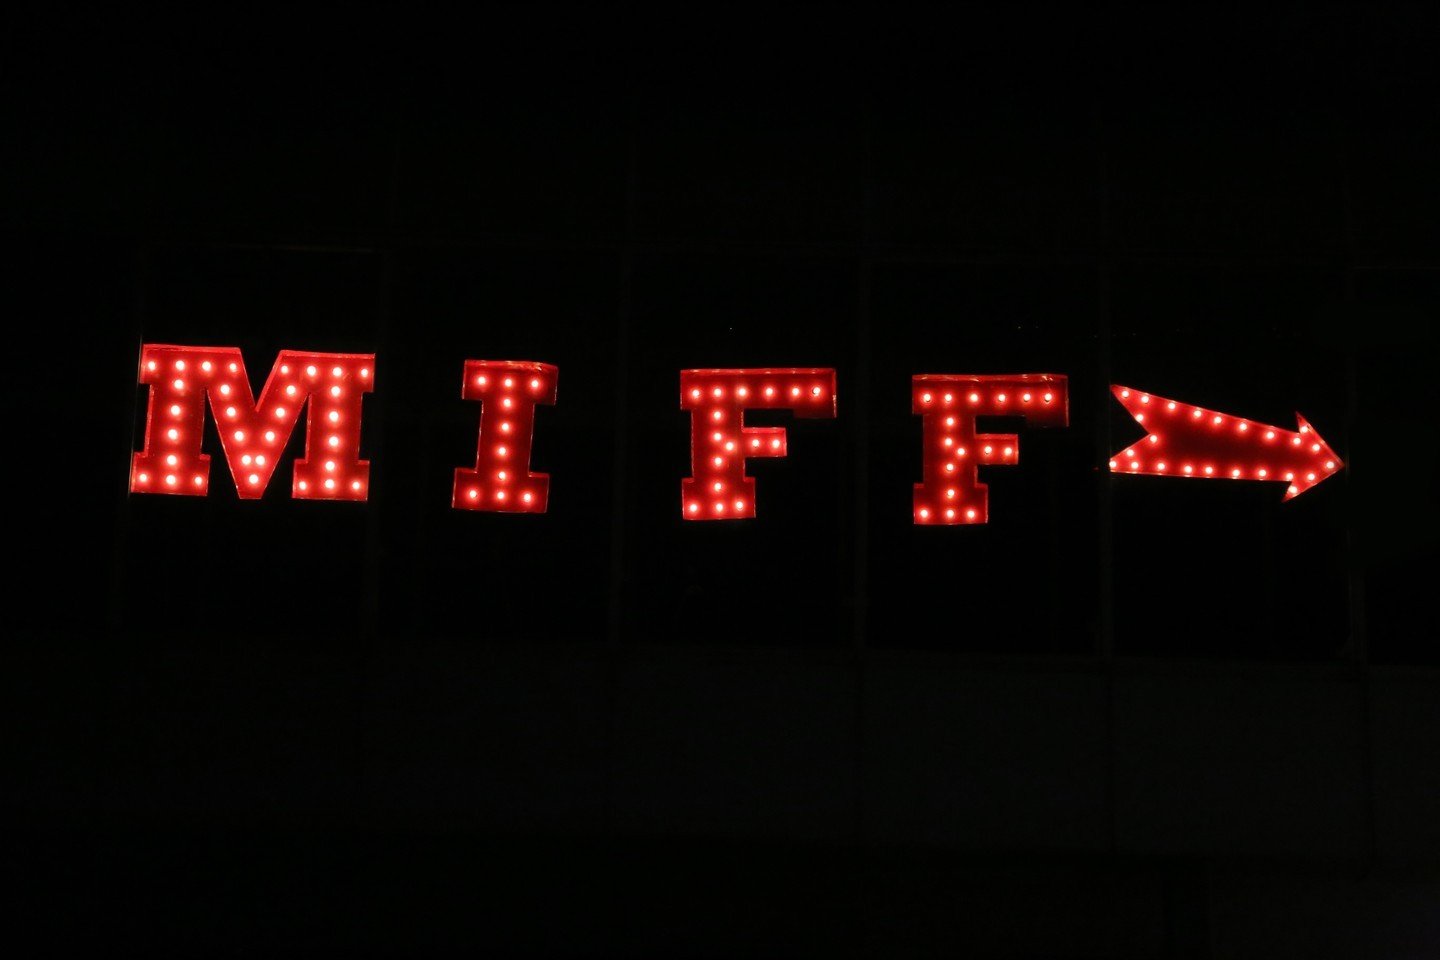 We are thrilled to announce that we have received the largest number of submissions ever to MIFF for this year&rsquo;s film festival! 

Seeing support like this for independent cinema in northern New England makes it all worth it. We can&rsquo;t wait